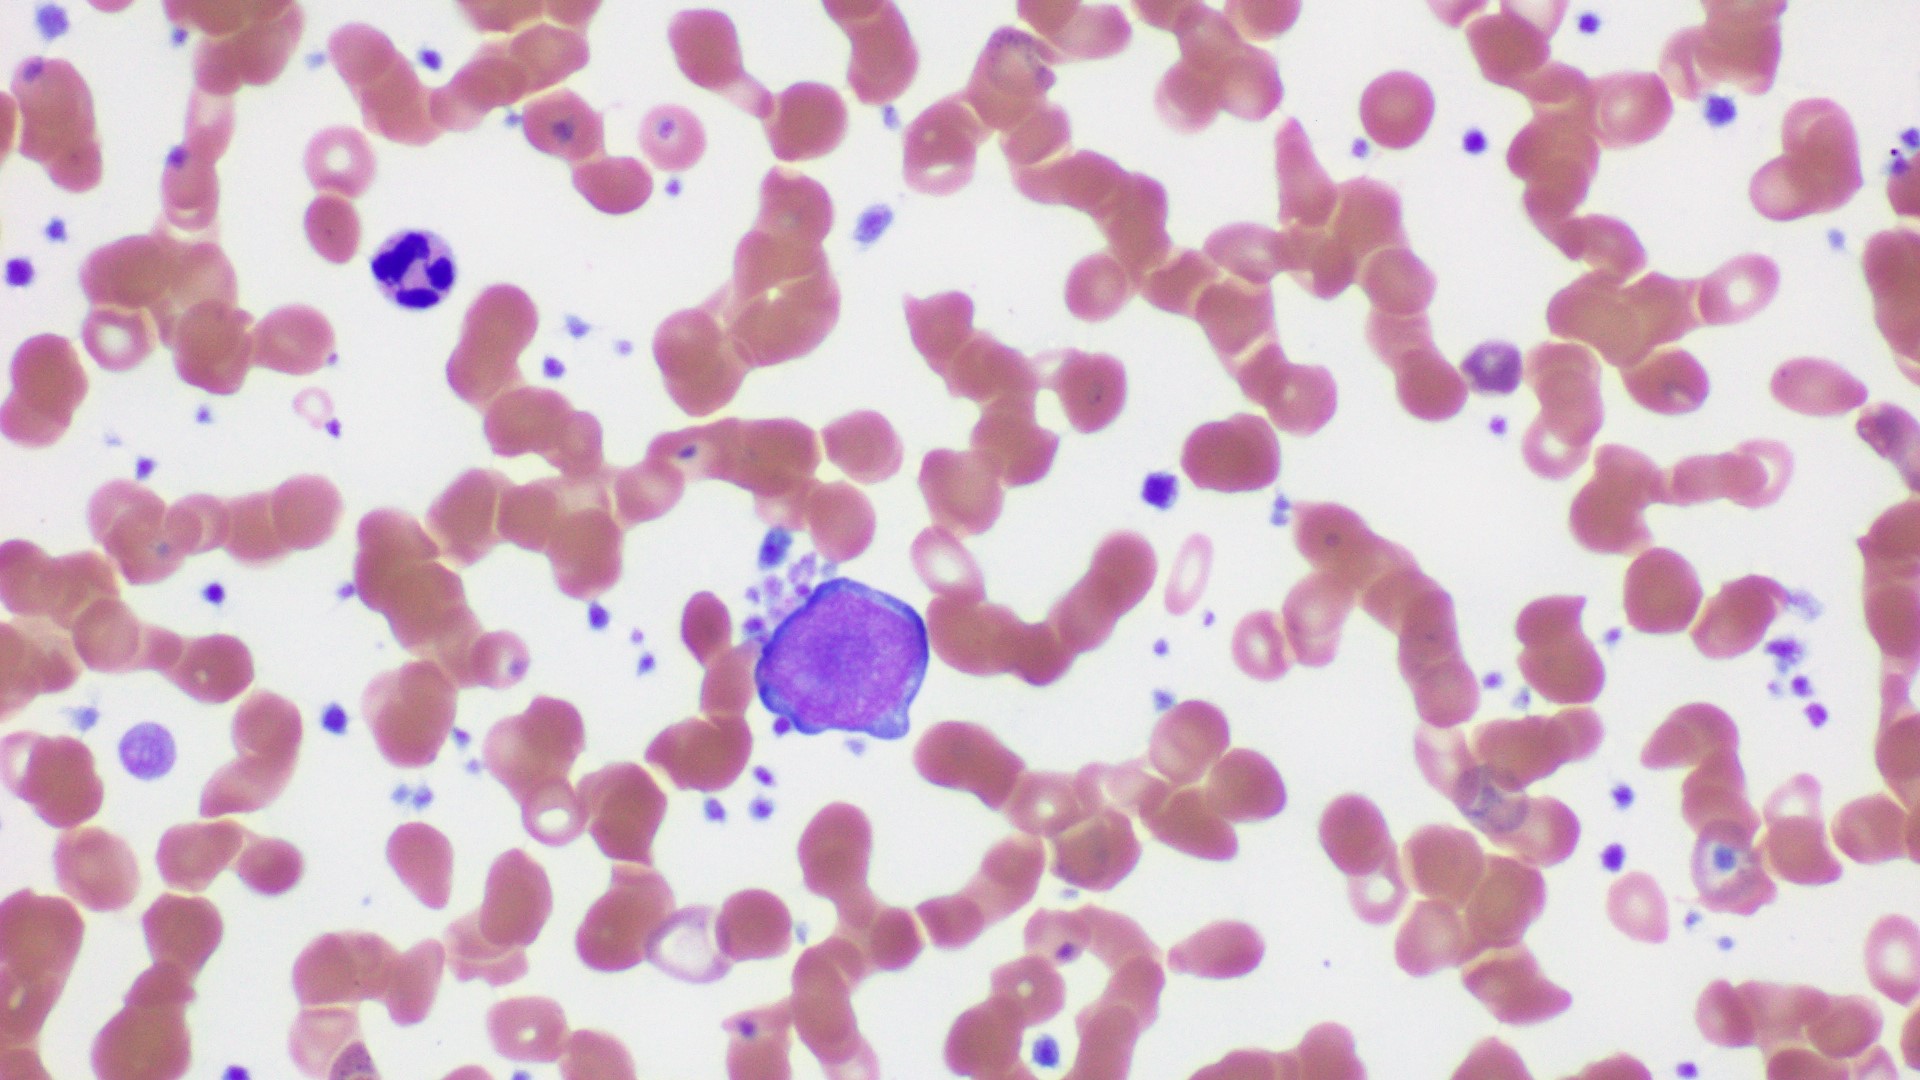 A hematoxylin and eosin (H&amp;E) stained slide showing platelet clumping around a neutrophil.